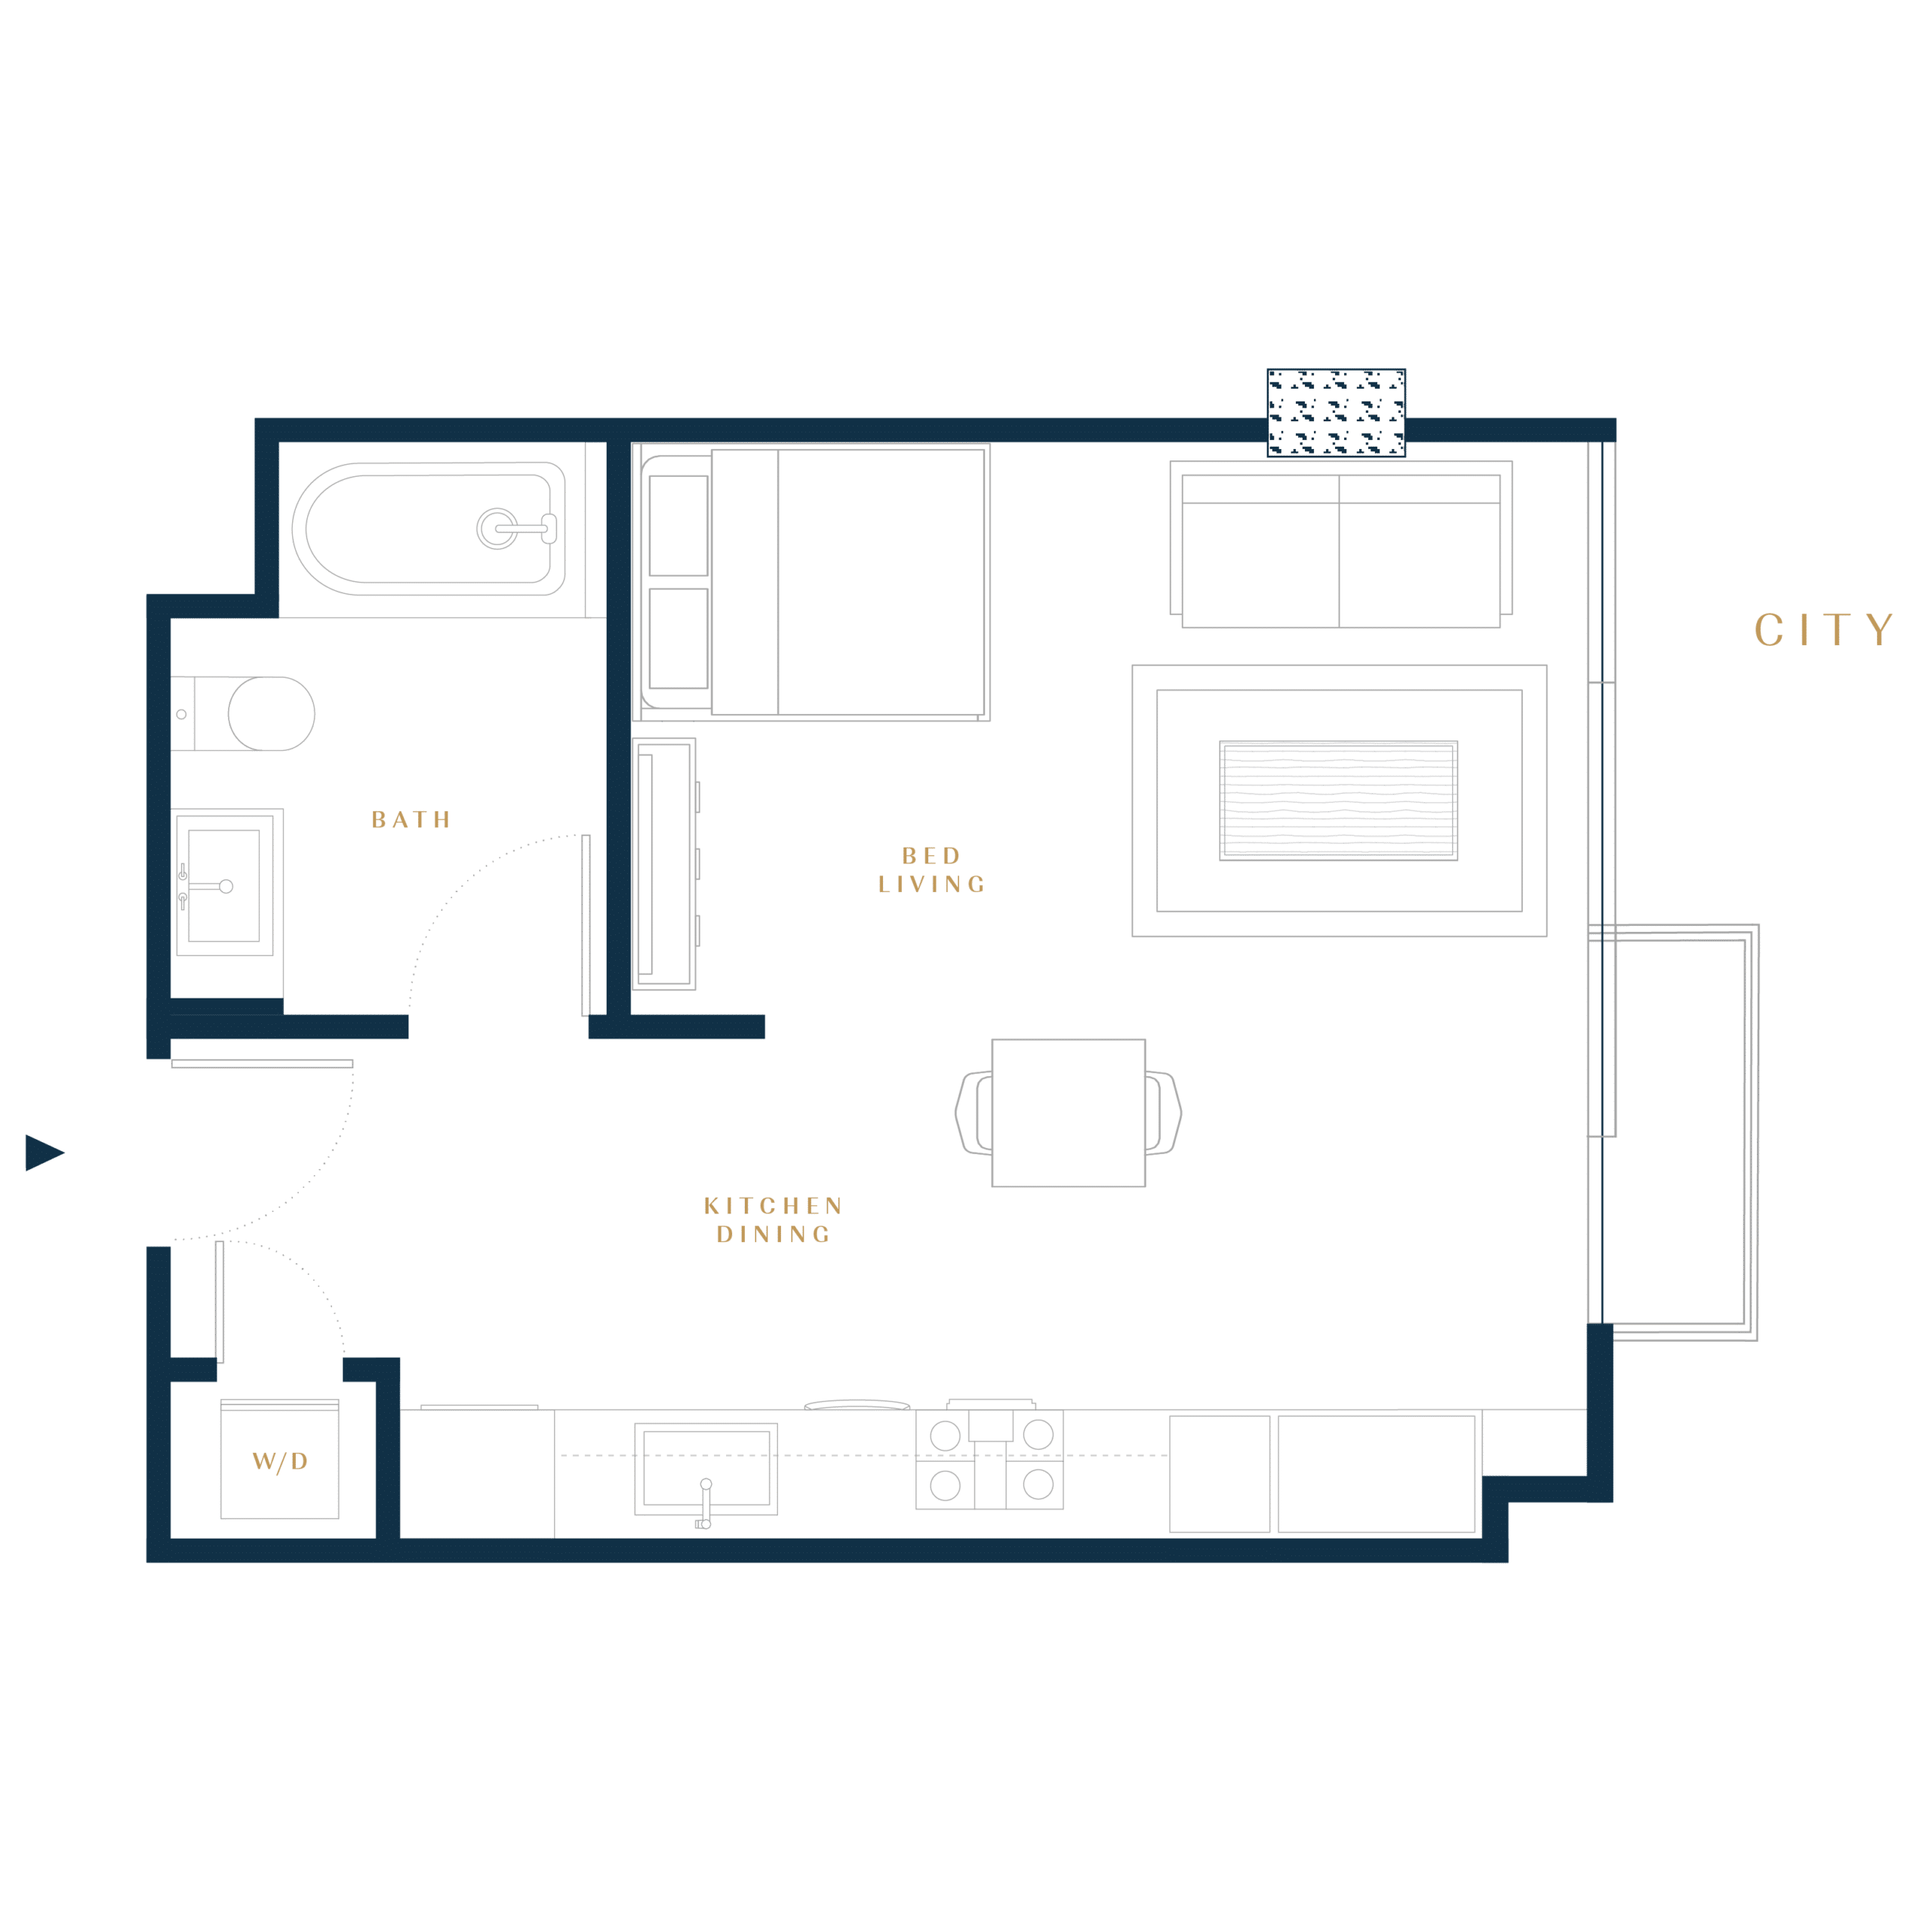 Residence S2 luxury condo floor plan in San Francisco Dogpatch